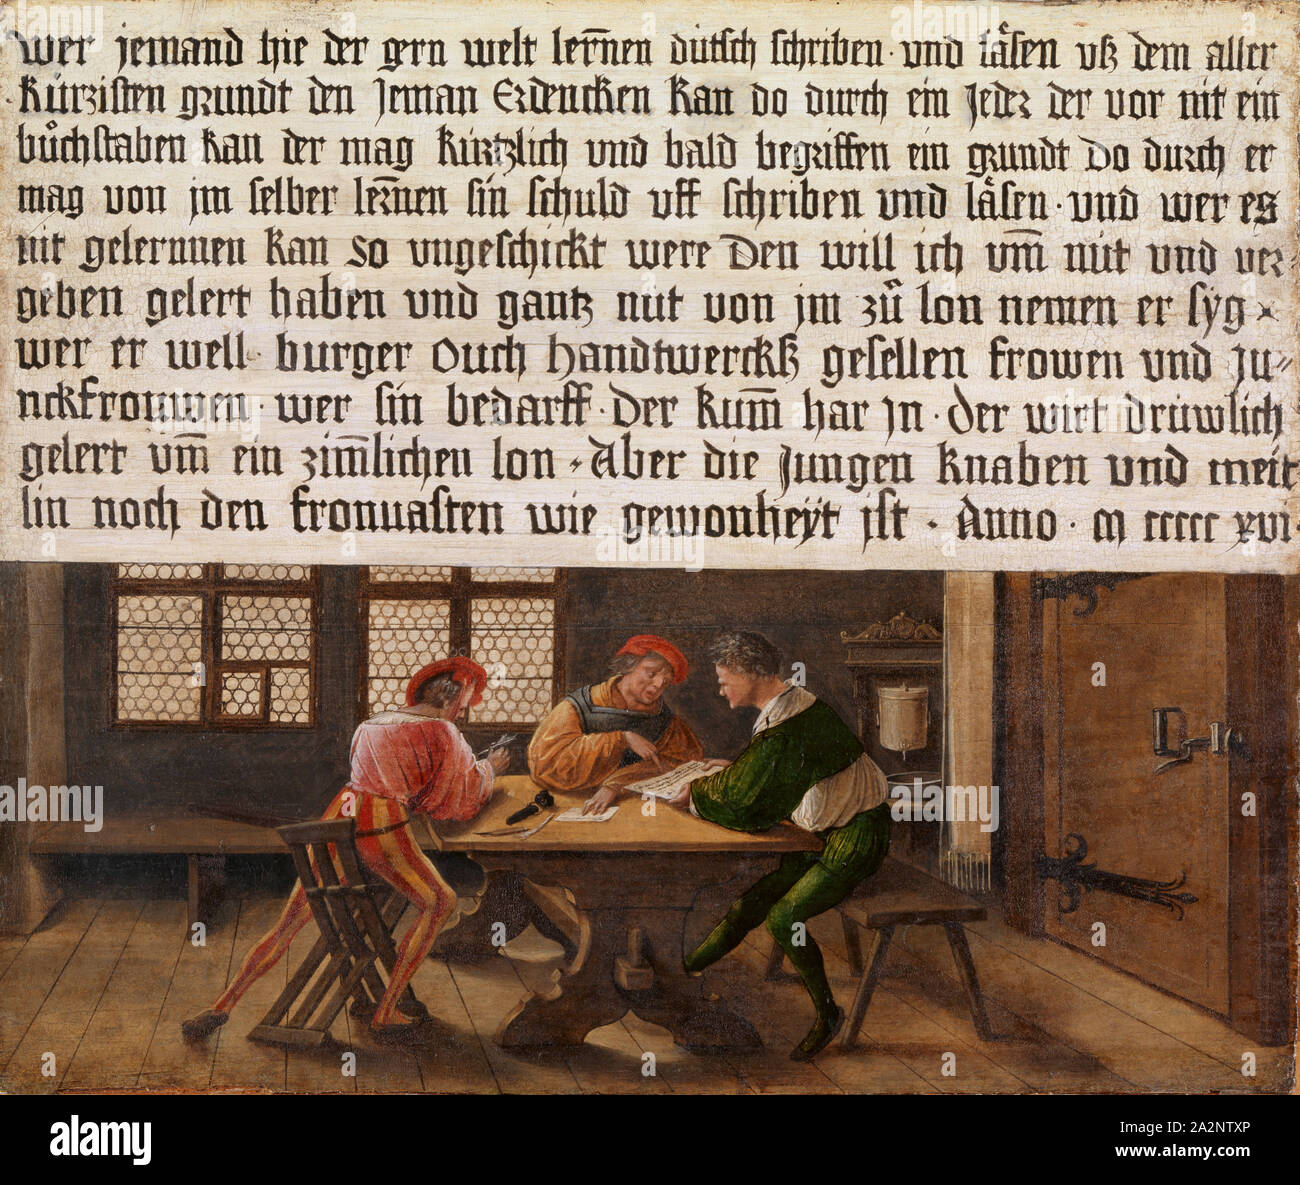 Sign of a schoolmaster (adult side), 1516, mixed technique on spruce, 55.3 x 65.5 cm, Not marked, but dated in the text box: who someone likes to learn the world scholarly [...] and read the all, kurzisten grundt the jeman, Erdencken can do so by anyone who can not nit a, buochstaben the may like and soon understands a reason do through him, her in the self-learning [n] sin blame uff rub and read • and who can, n learn kan so awkward, I would have lured him to death and to give and give, and to give of all in the world to him, he, she, well, burger, ouch, hand-to-hand, and fugen, and fawns, m Stock Photo